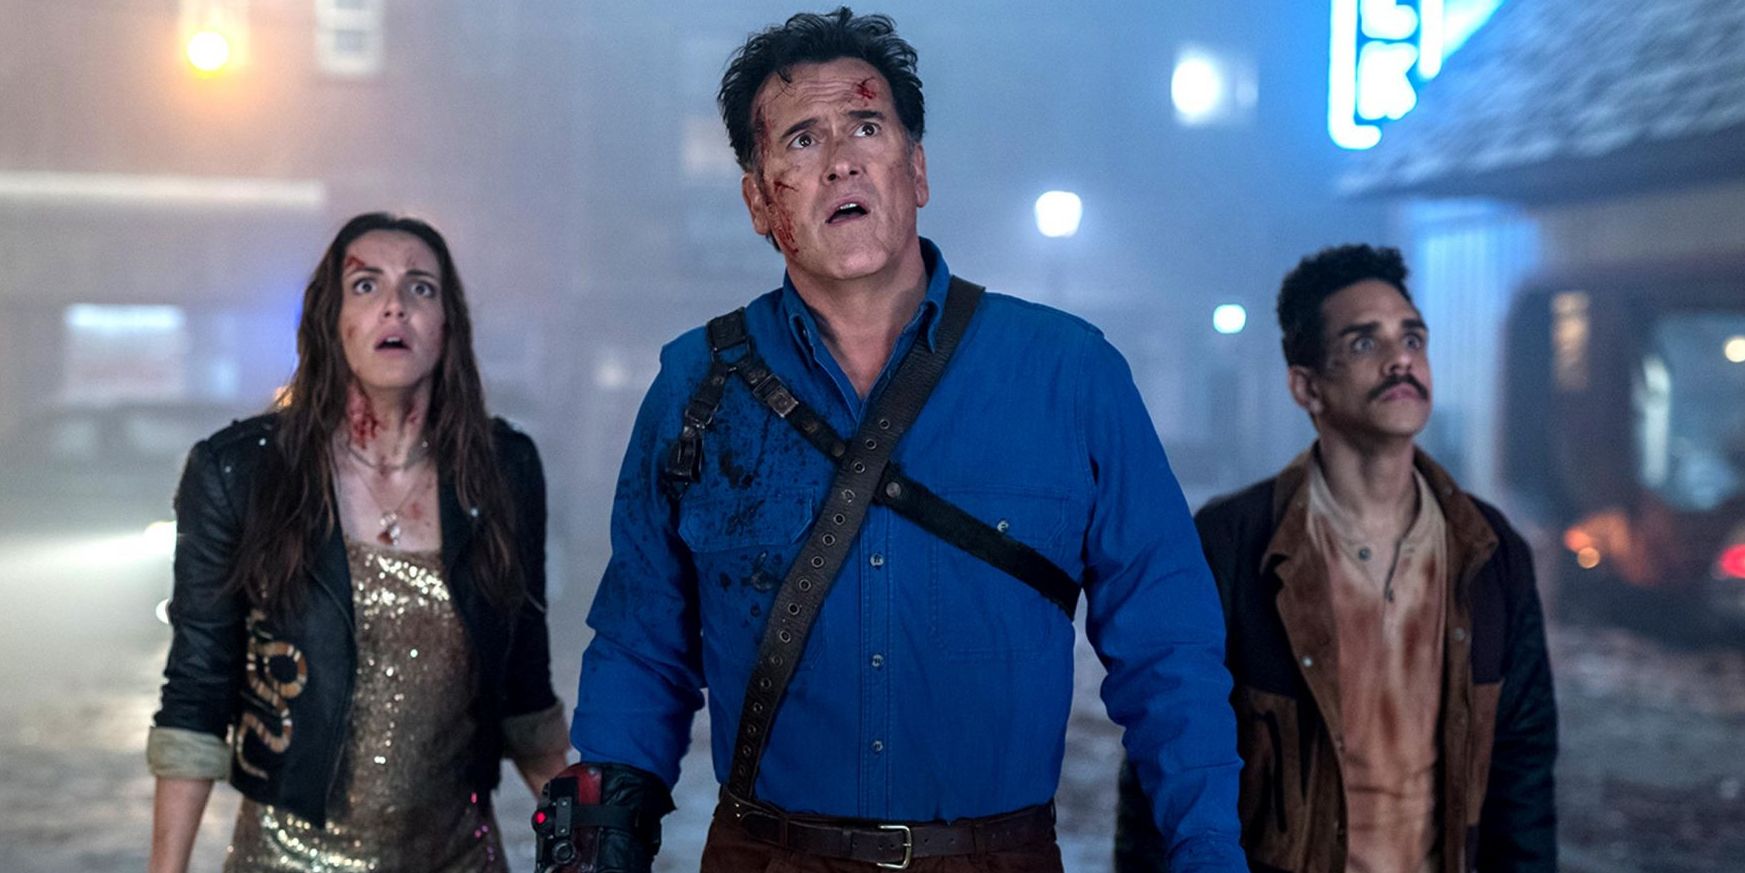 Ash, Mia, and Pablo look up while being injured in a still from Ash vs Evil Dead